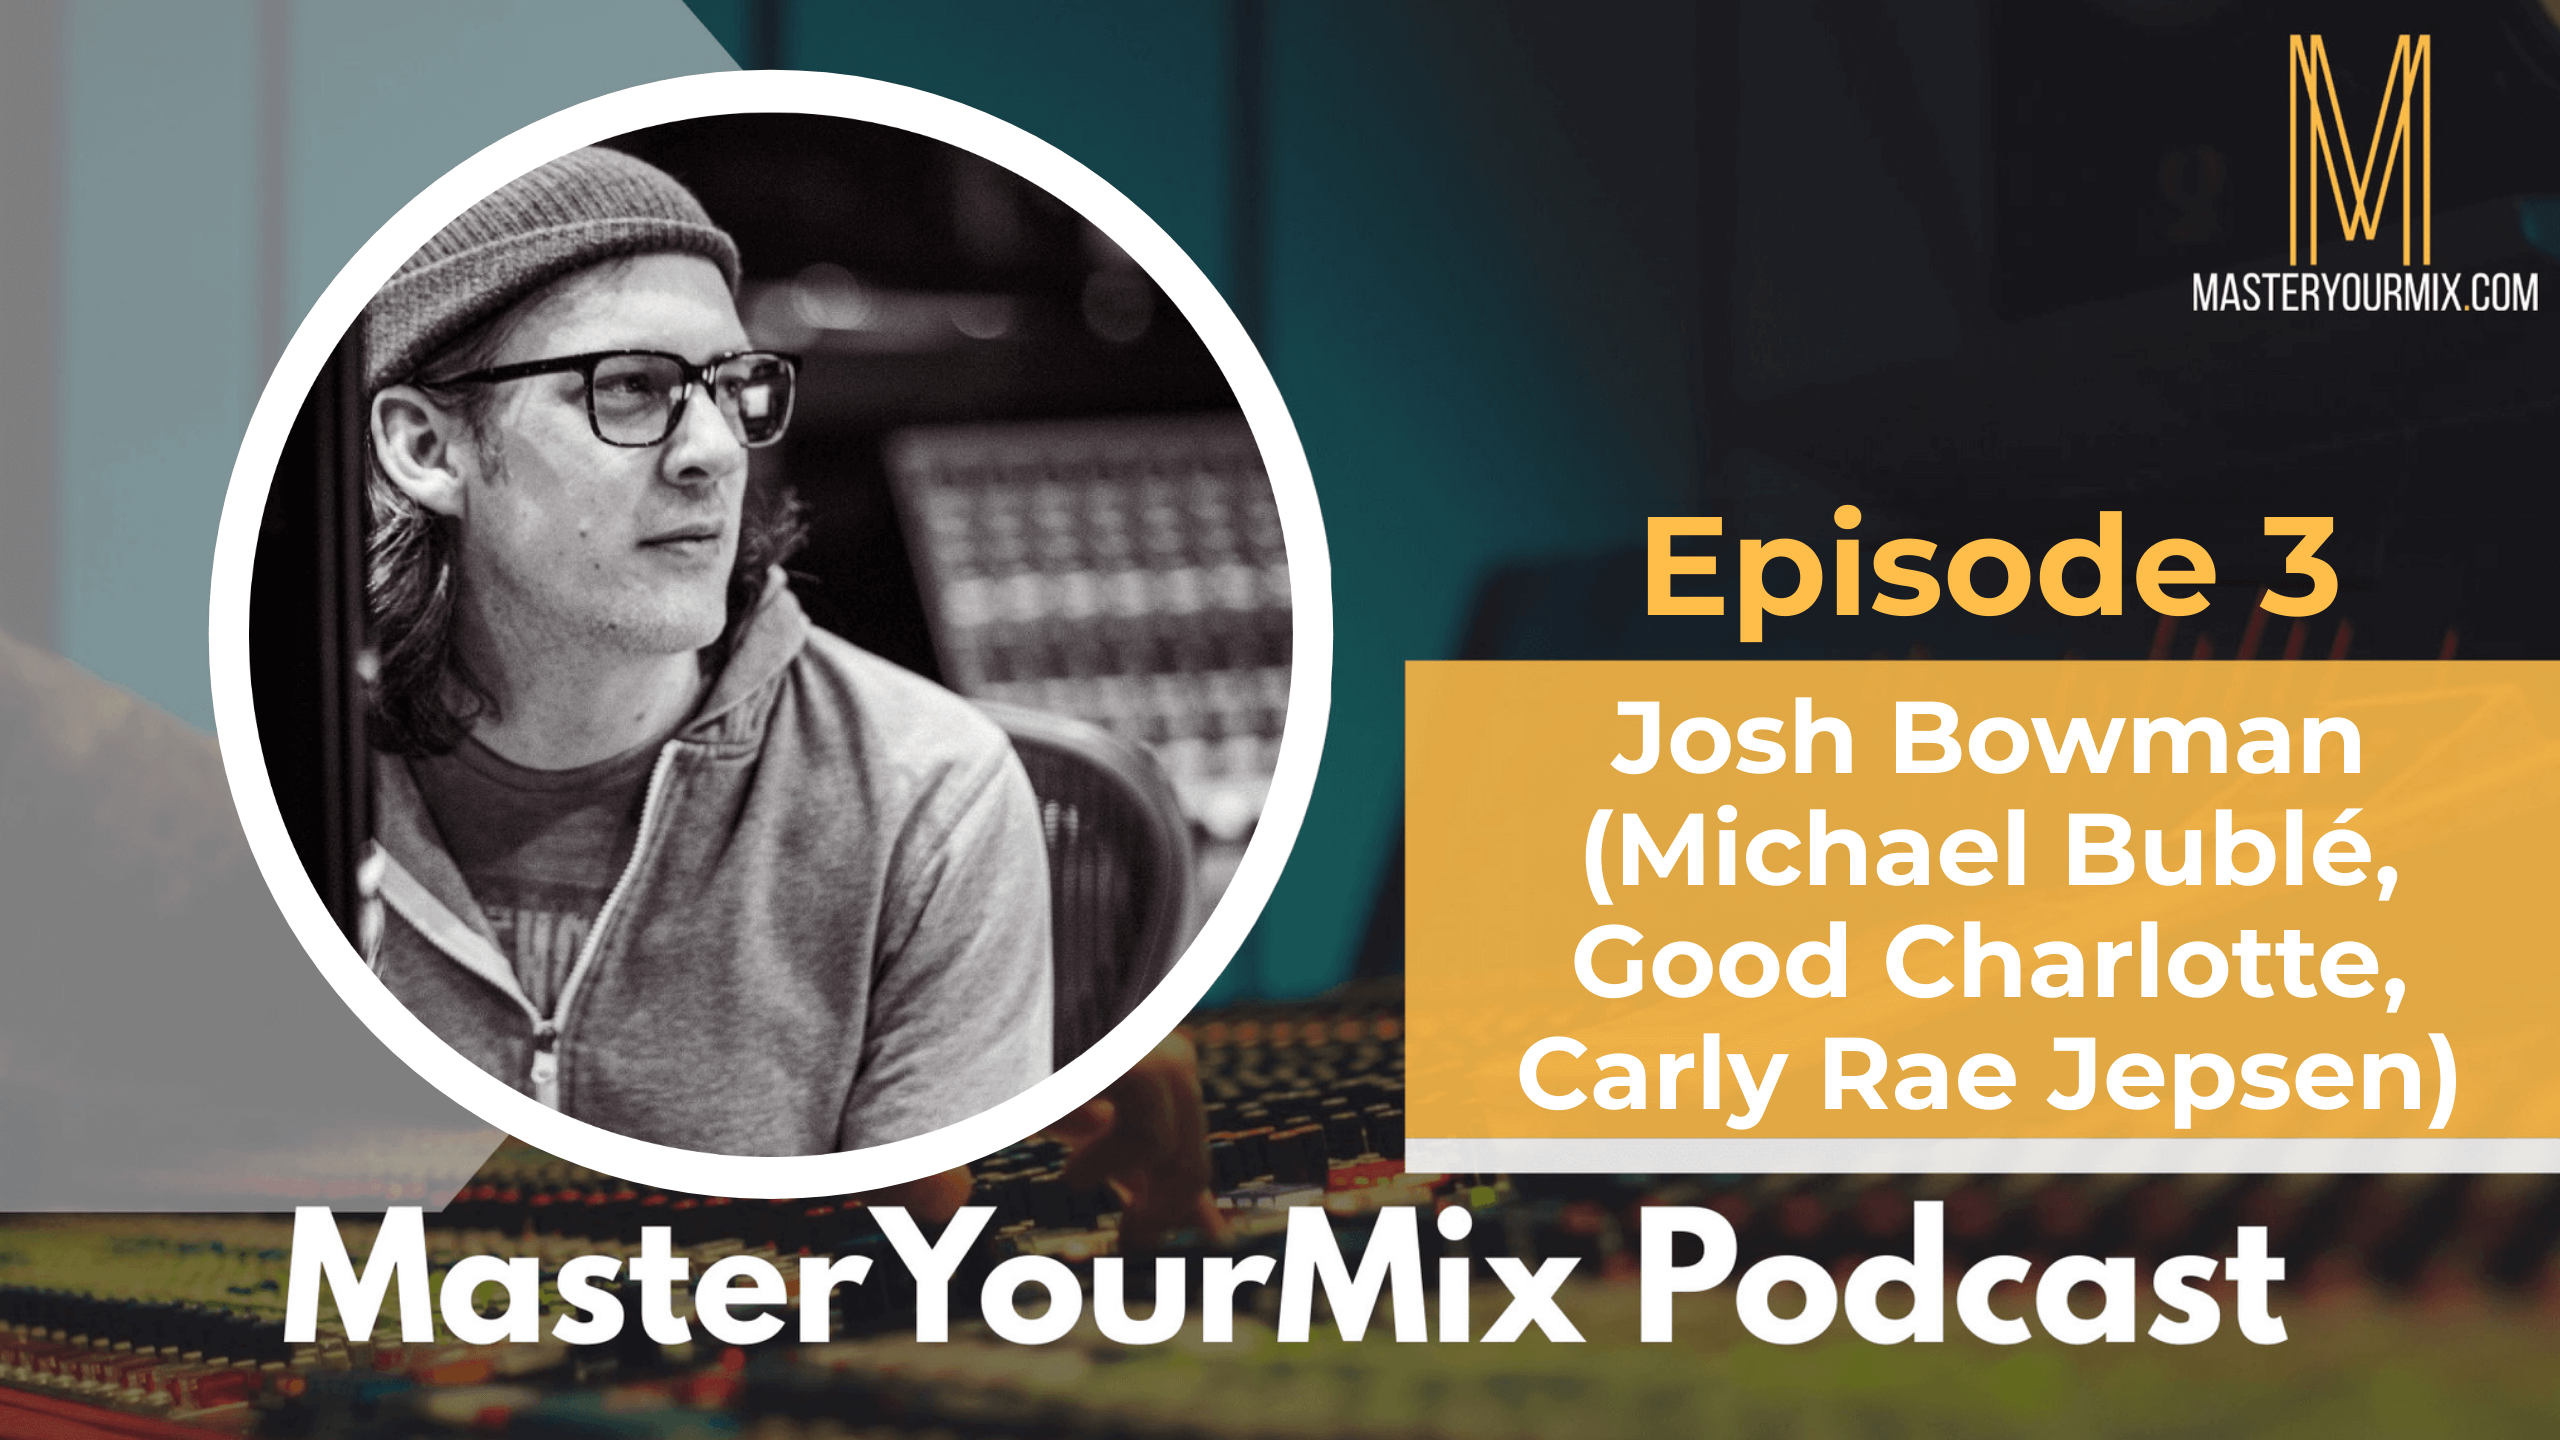 master your mix podcast, ep 3 josh bowman